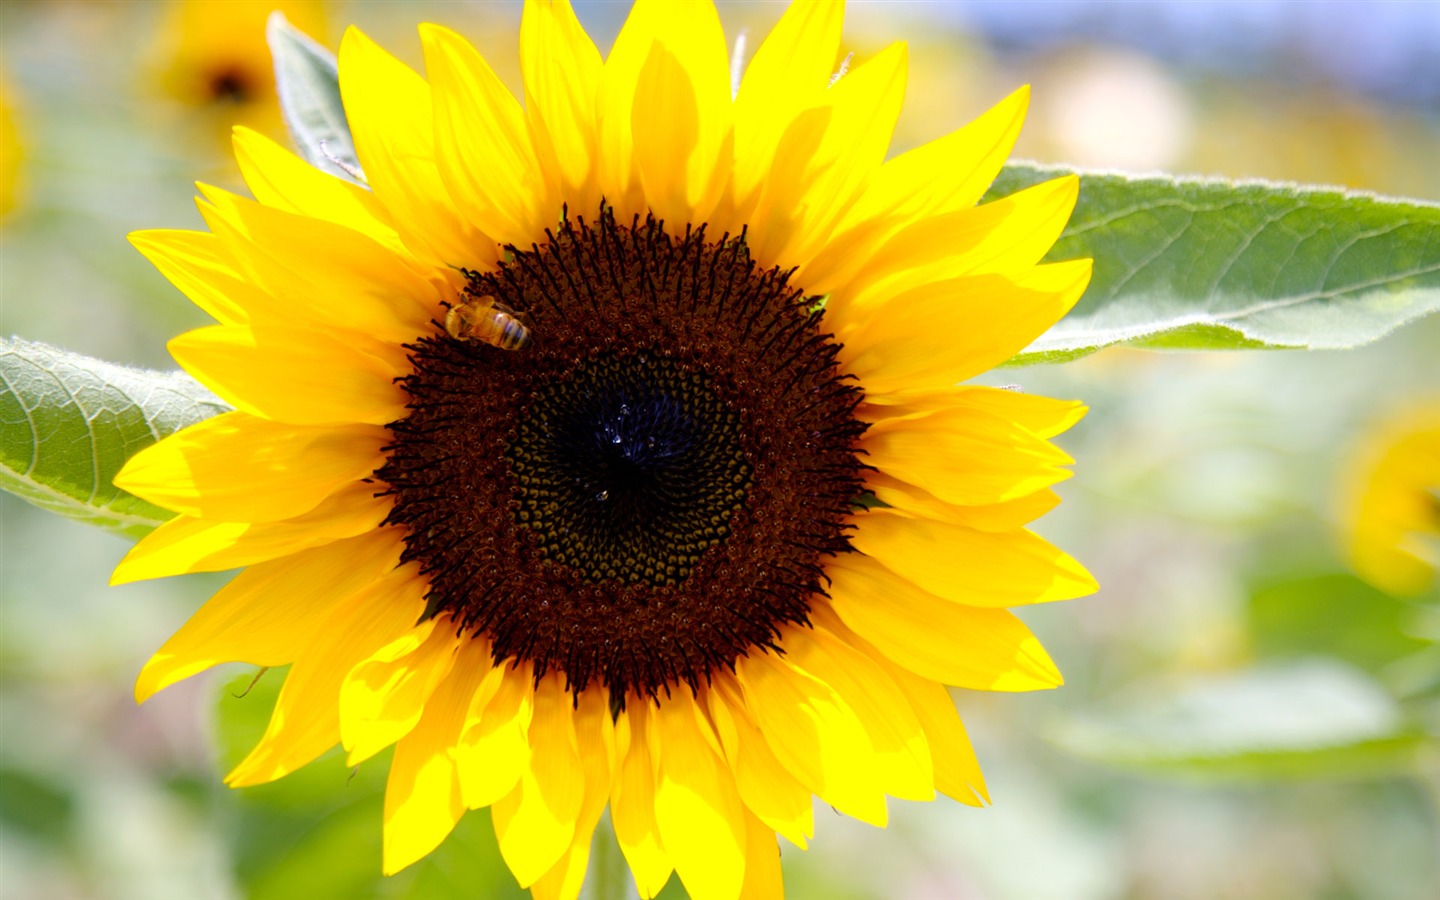 Sunny sunflower photo HD Wallpapers #22 - 1440x900